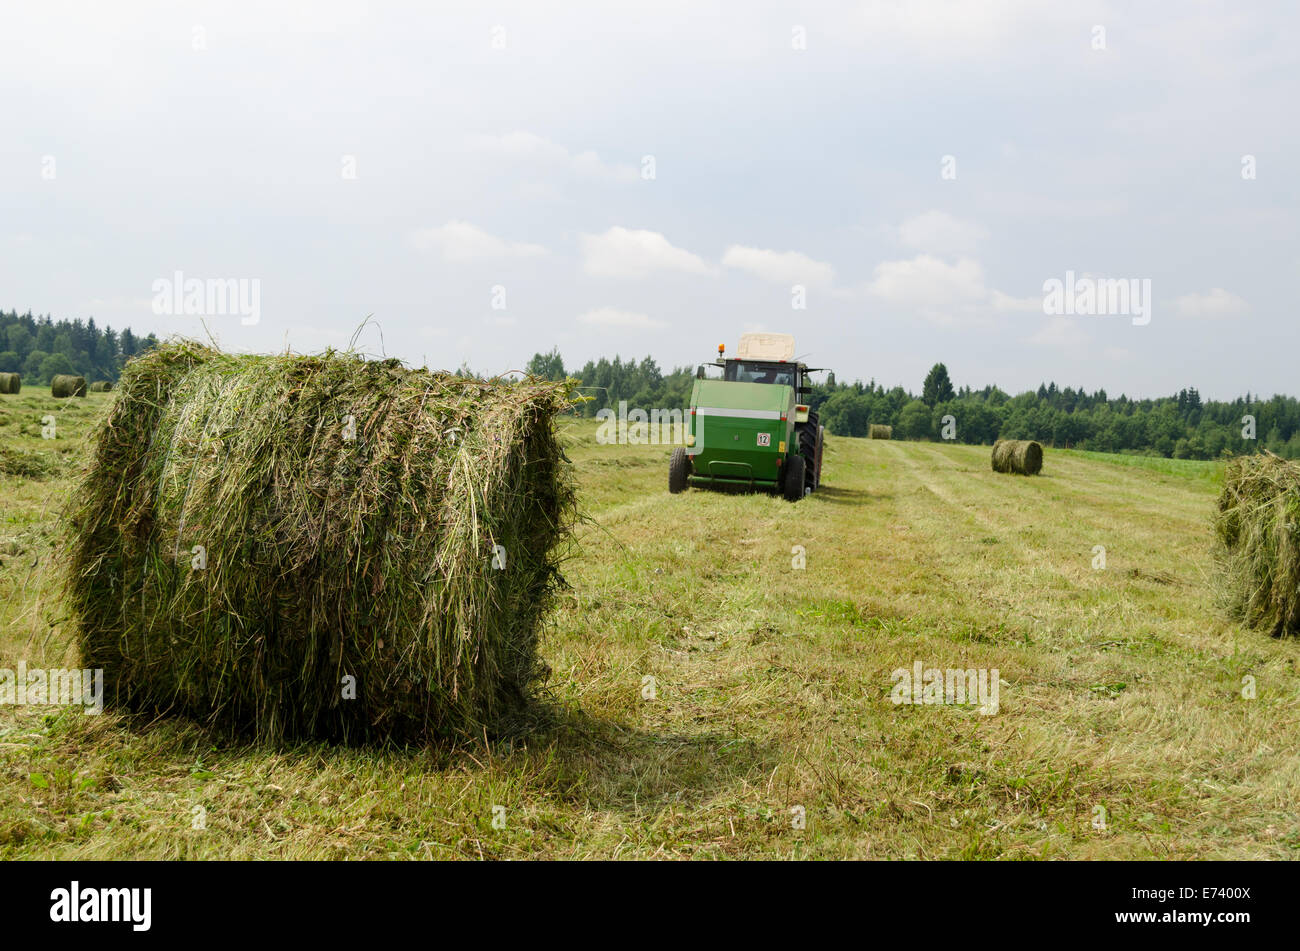 Straw bales and agricultural machine tractor collect gather hay in field near rural village houses. Stock Photo